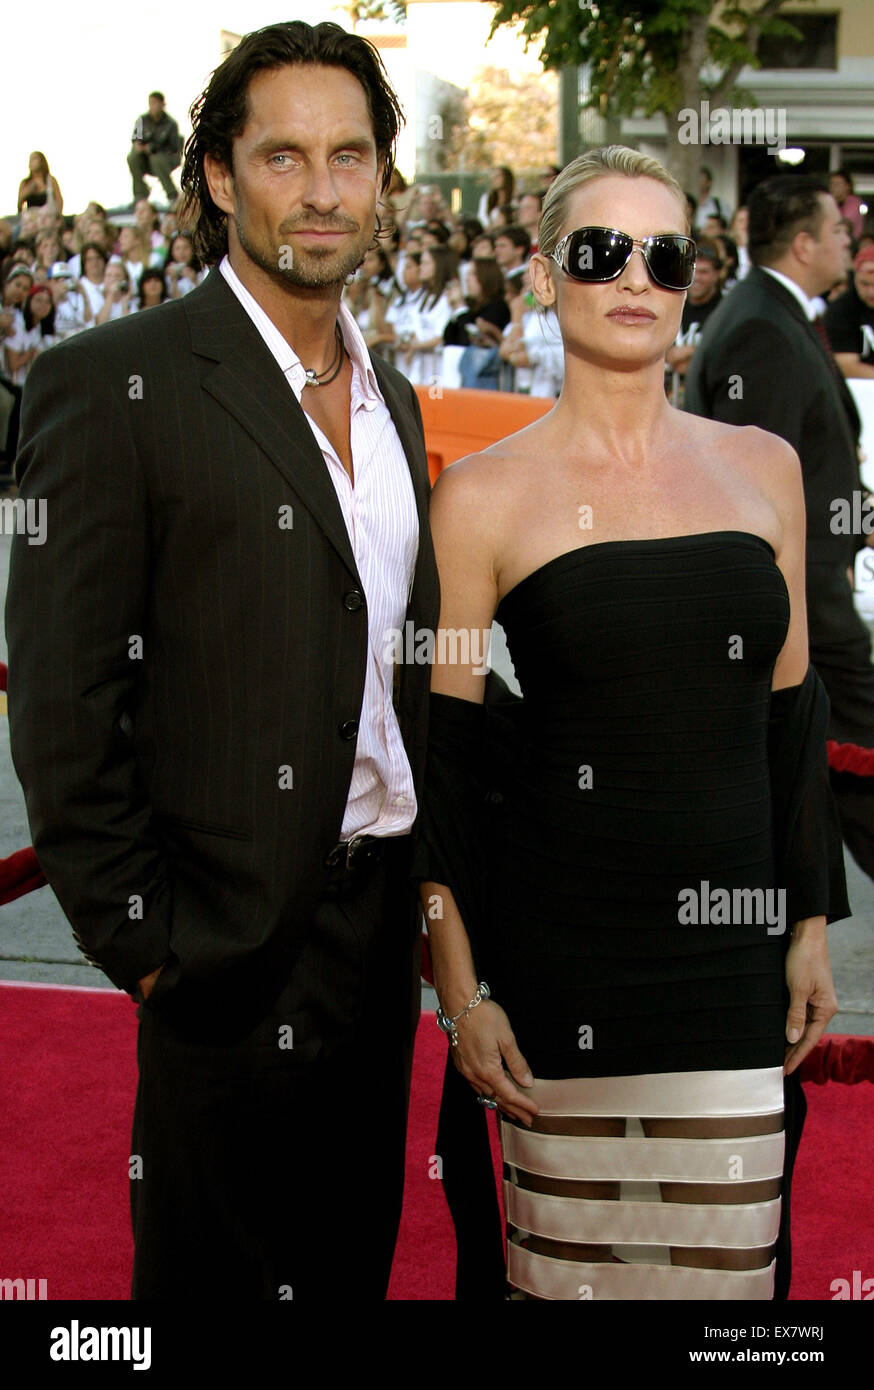 Niklas Soderblom and Nicollette Sheridan attend the Los Angeles Premiere of 'Mr. & Mrs. Smith'. Stock Photo